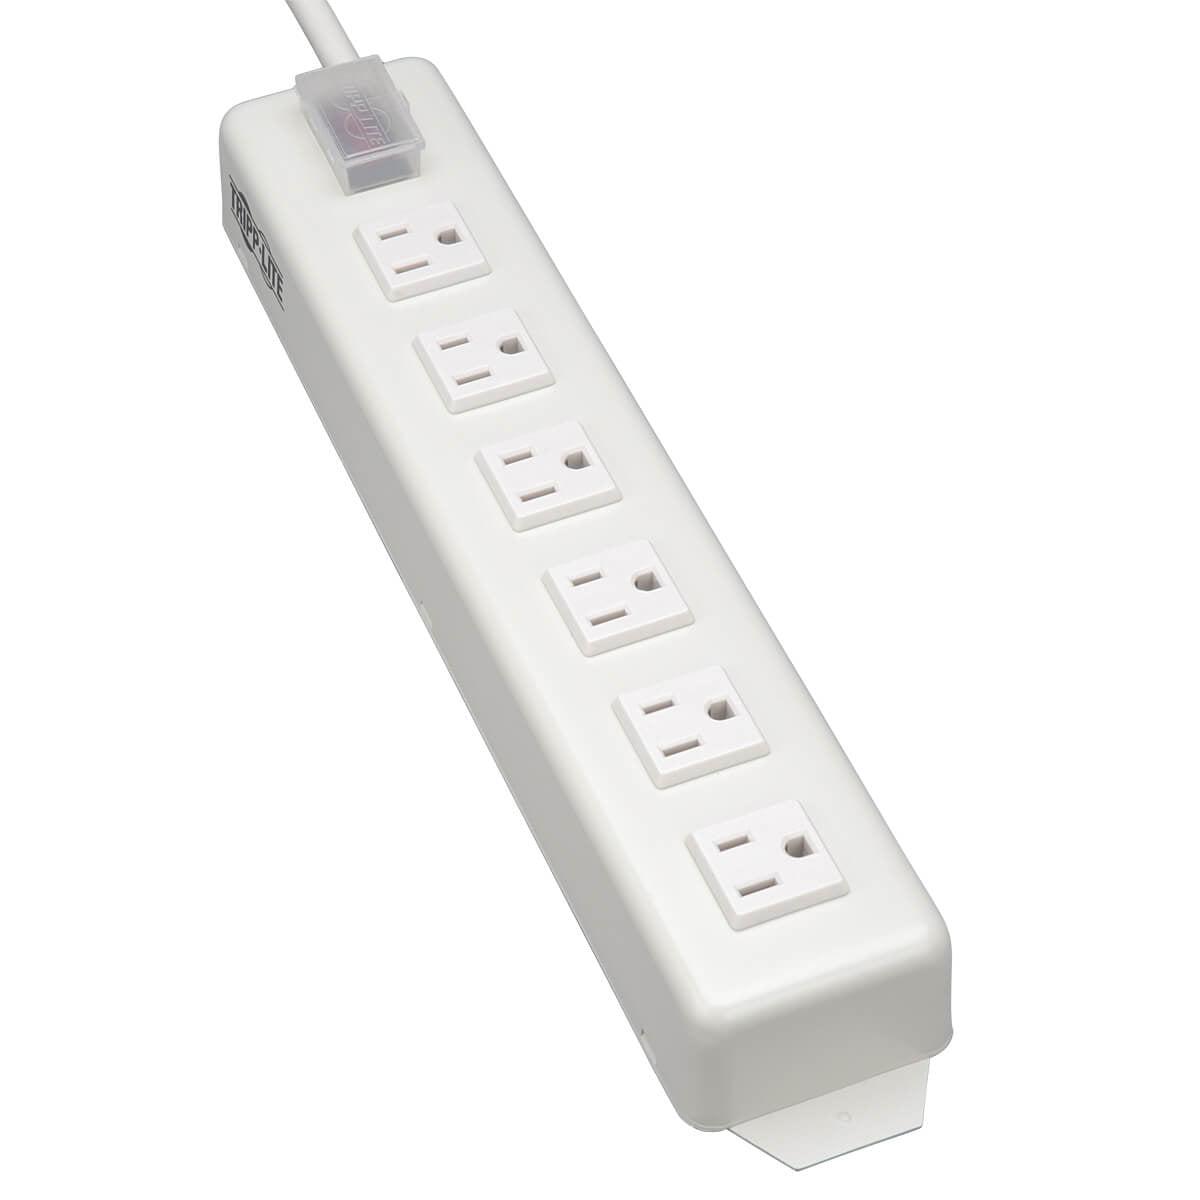 Tripp Lite Tlm615Ncra Surge Protector Grey 6 Ac Outlet(S) 120 V 4.5 M